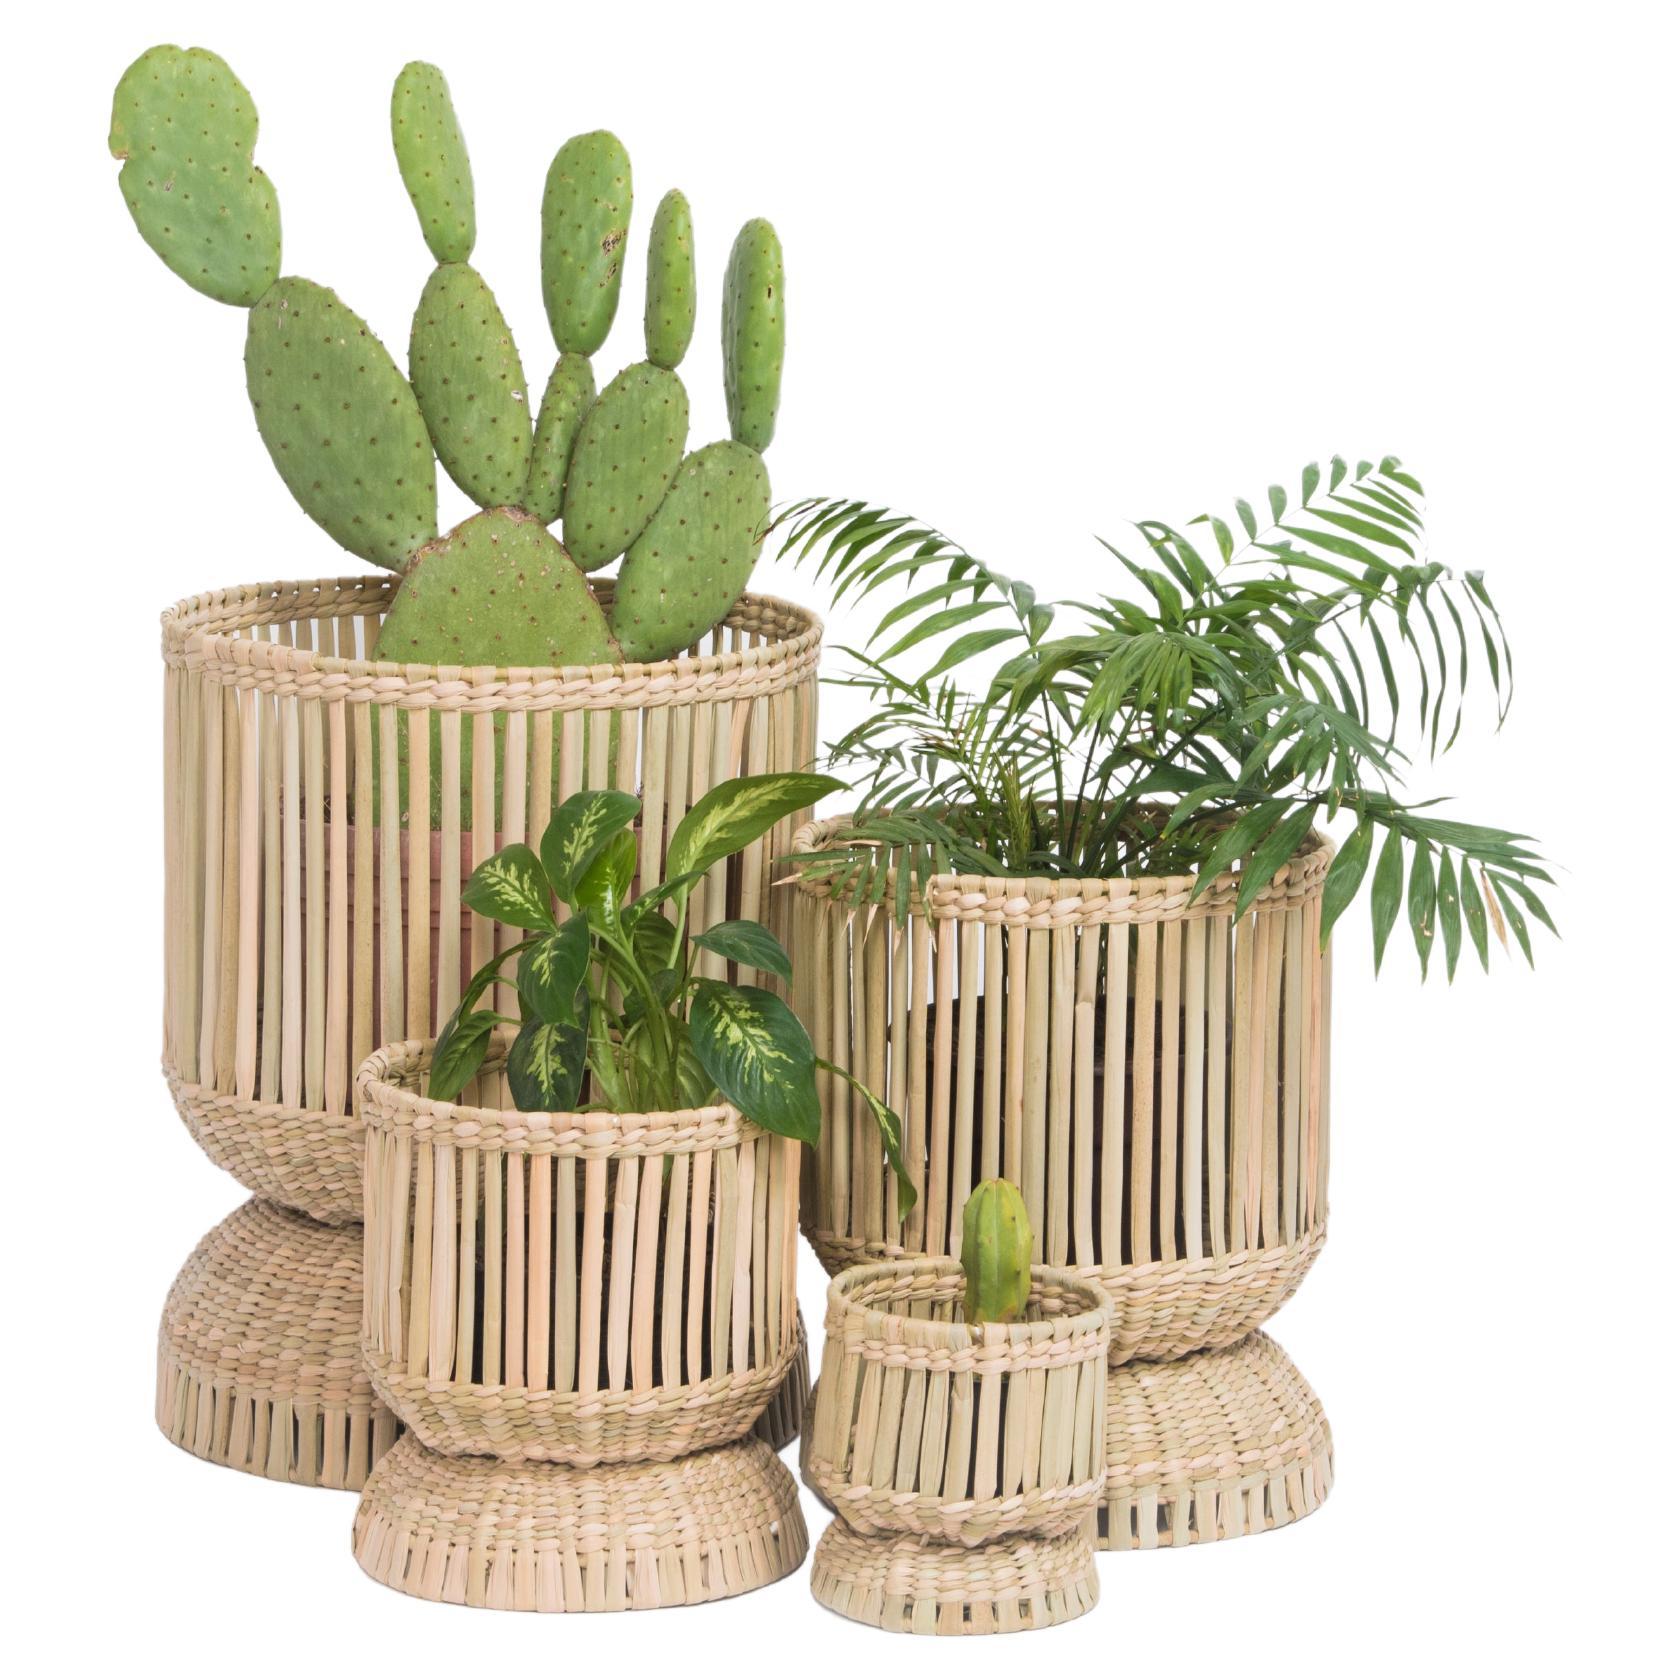 Set of Four Plant Pots, Hand Weaved with Natural Fiber